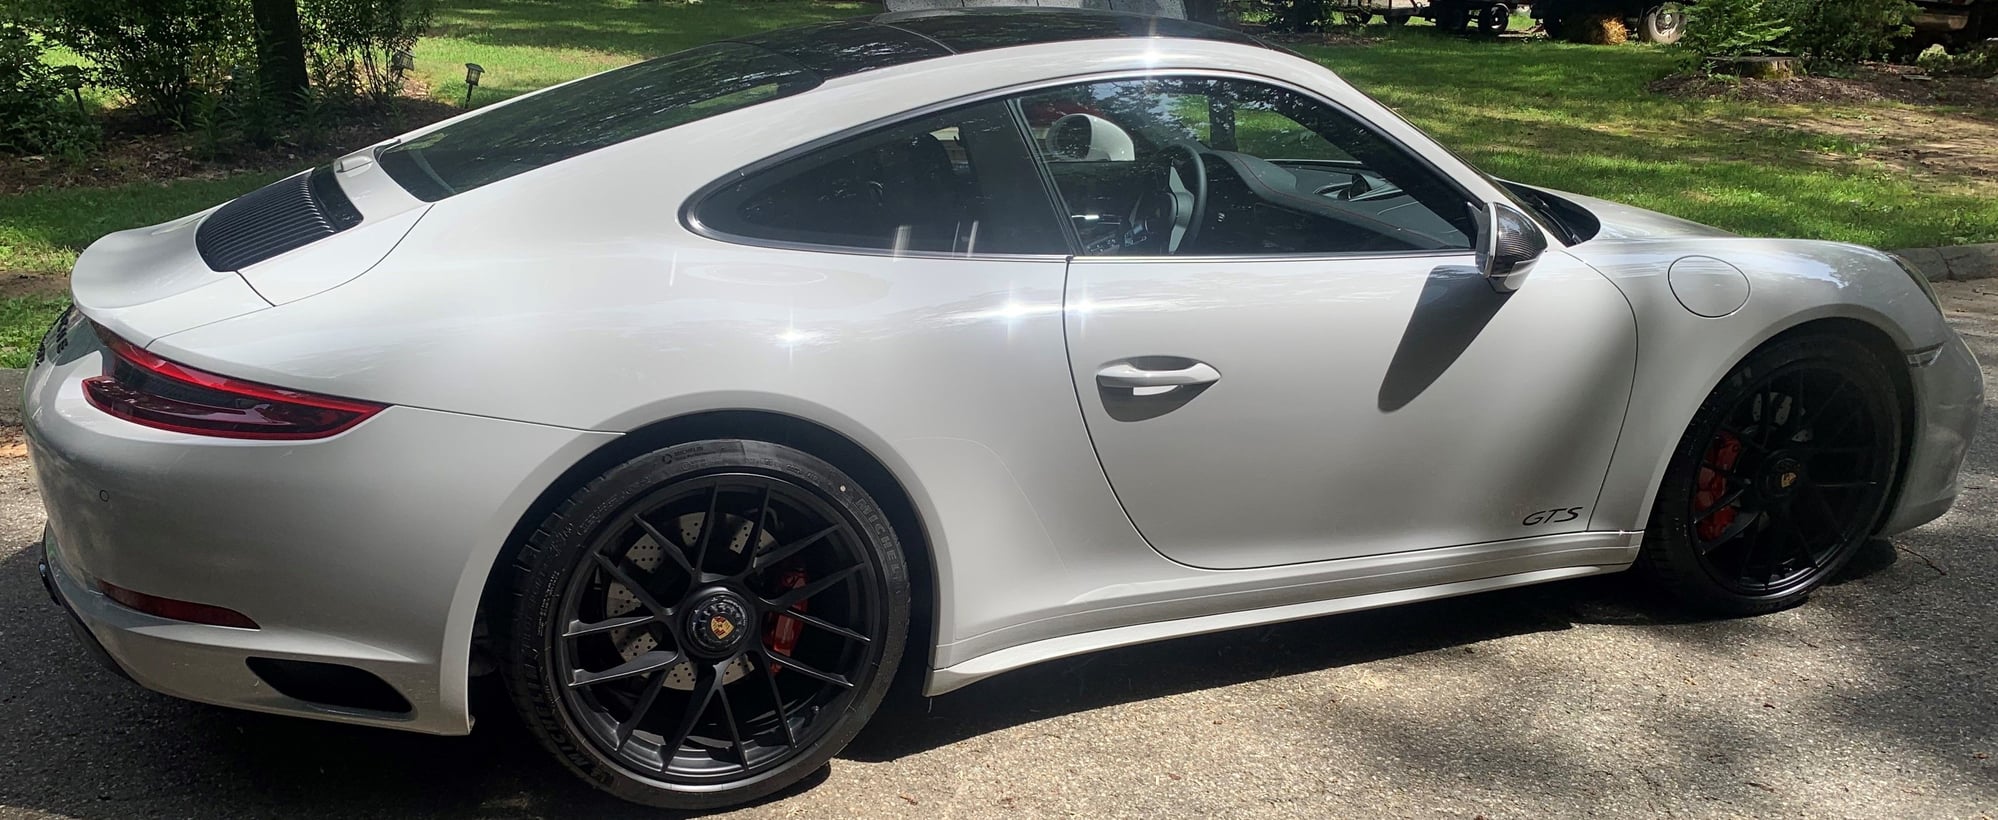 2019 Porsche 911 - 2019  911 4 GTS.. Chalk color...Manual Trans.. ONLY 5500 miles.. EXcellent condition. - Used - VIN WP0AB2A93KS114928 - 5,500 Miles - 6 cyl - 4WD - Manual - Coupe - Other - Shelton, CT 06484, United States